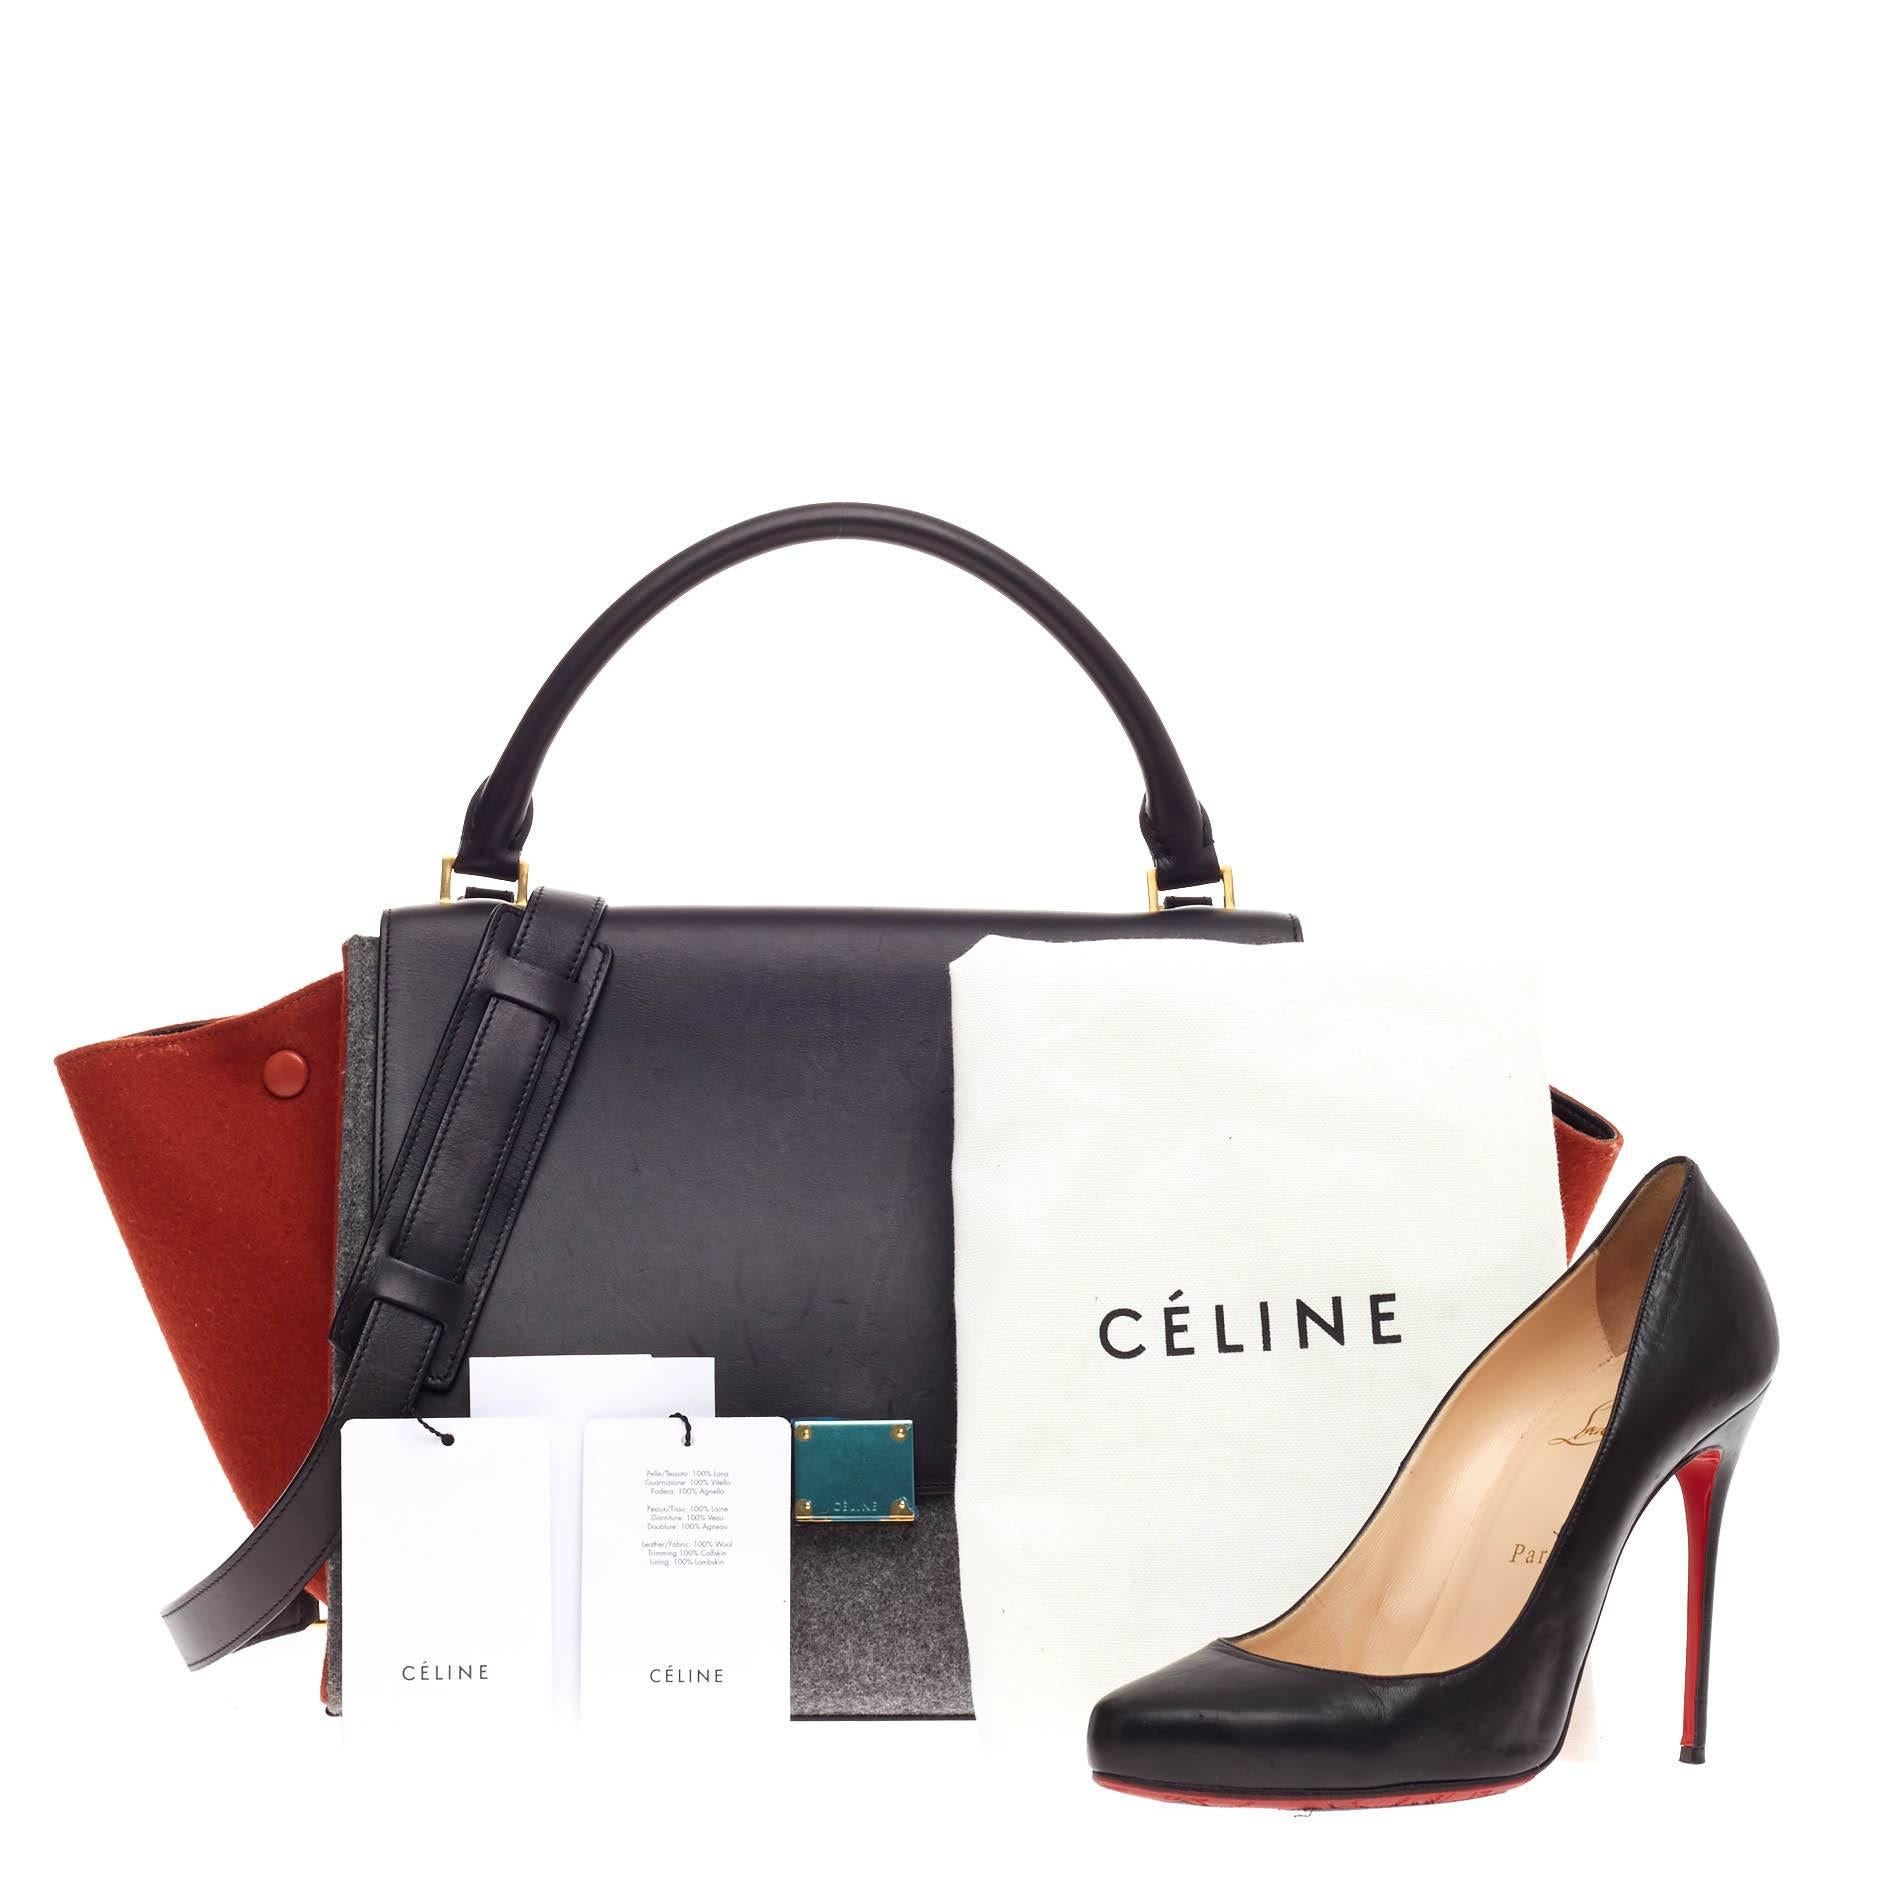 This authentic Celine Tricolor Trapeze Leather and Felt Medium presented in the brand's Fall/Winter 2014 Collection is a modern minimalist design with a playful twist in an array of subdued colors. Crafted from gray felt and black leather with